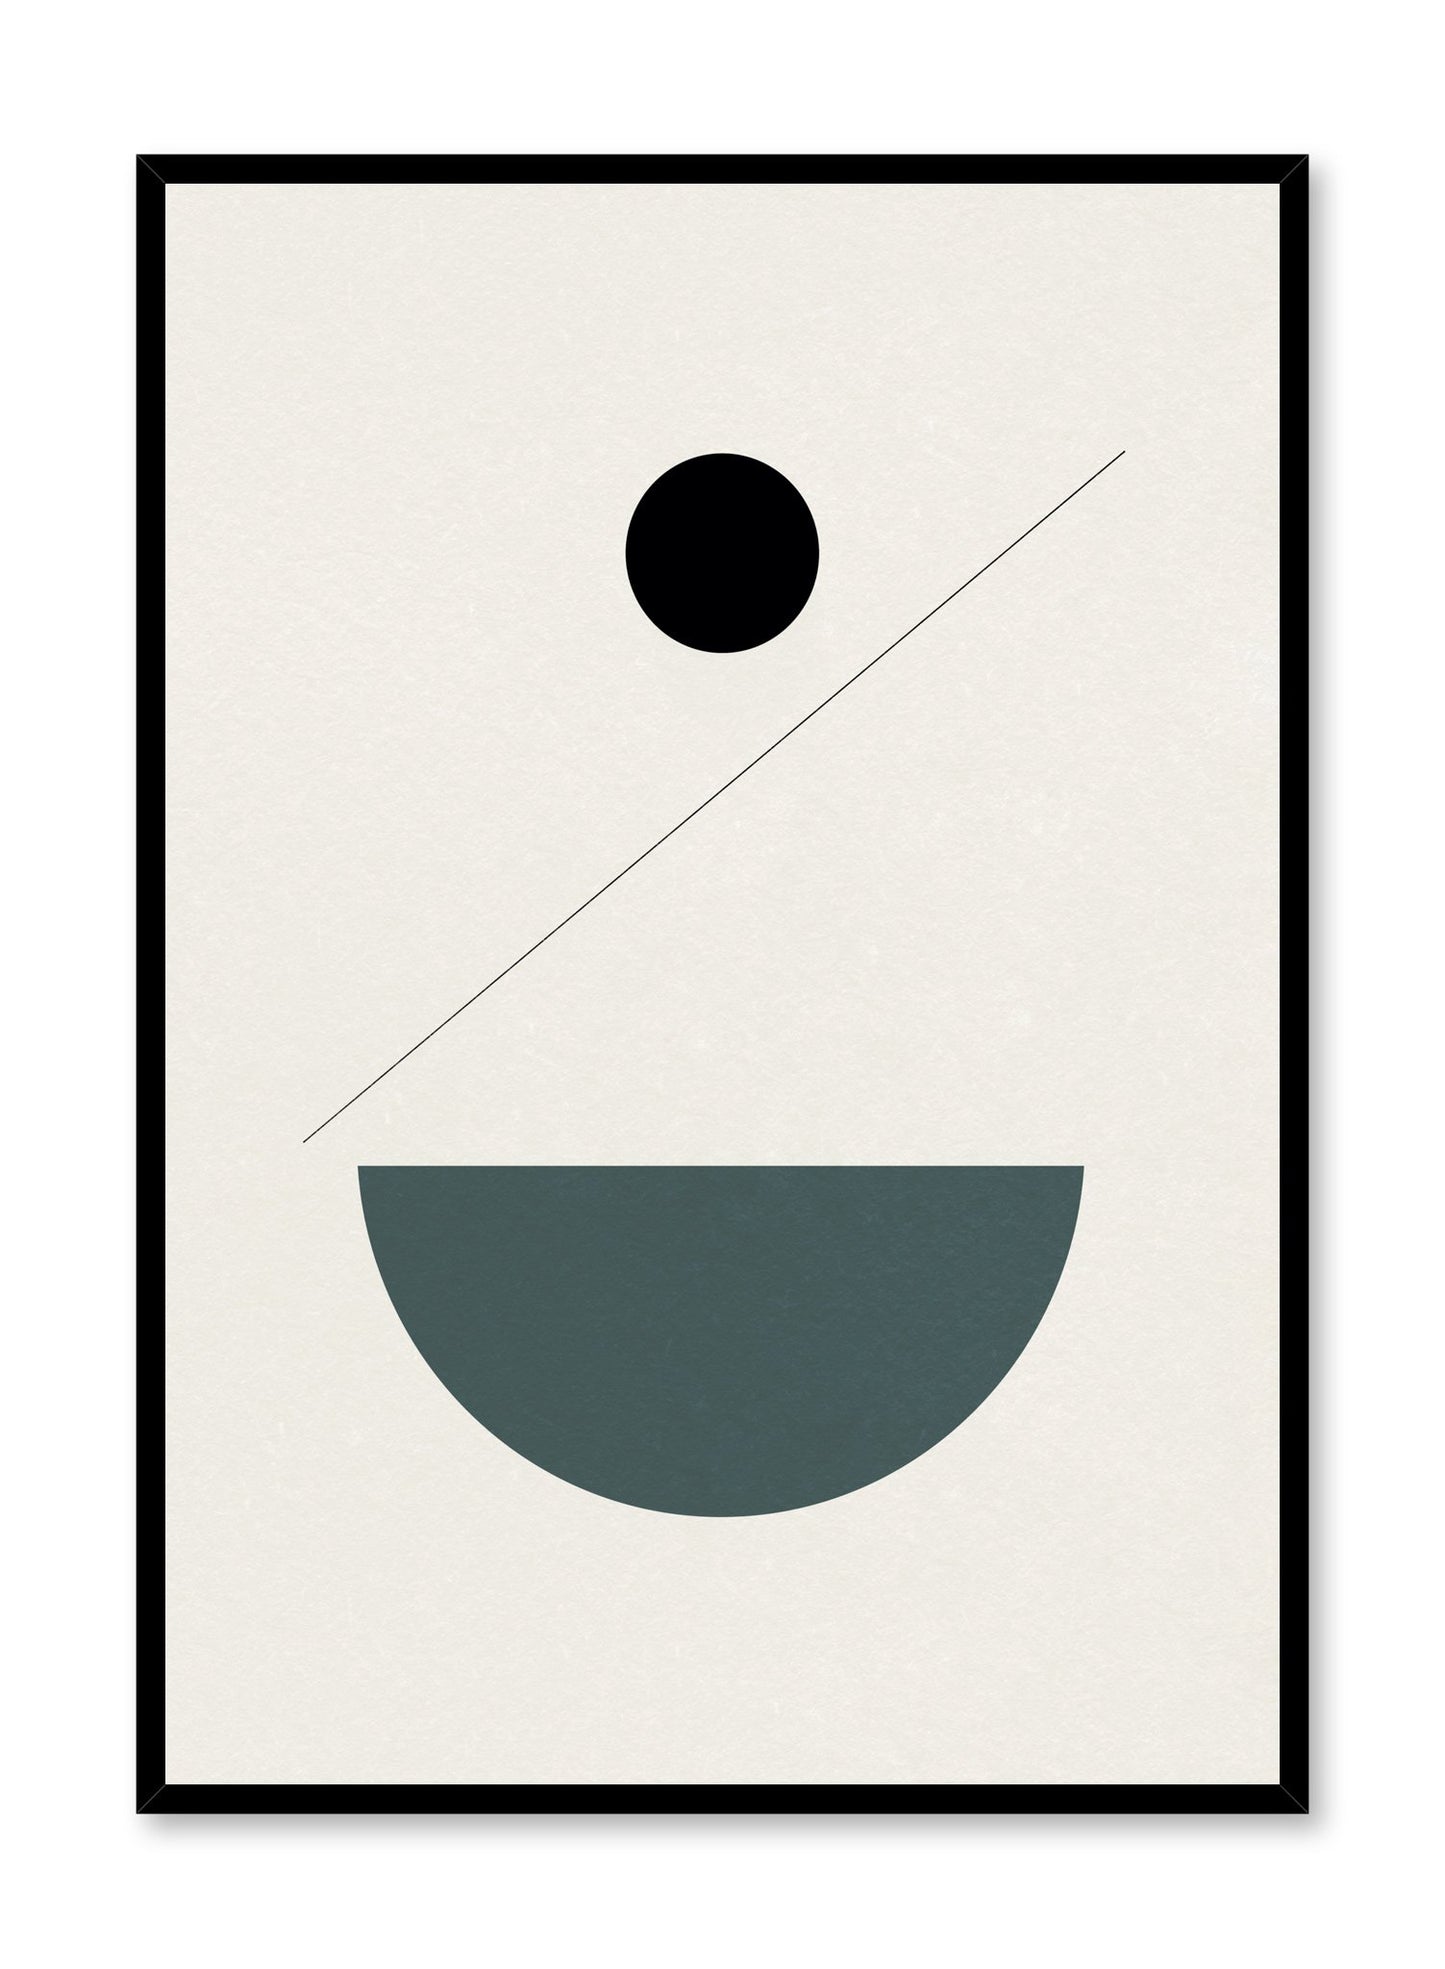 Modern abstract poster by Opposite Wall with minimalist shapes in balance by Toffie Affichiste